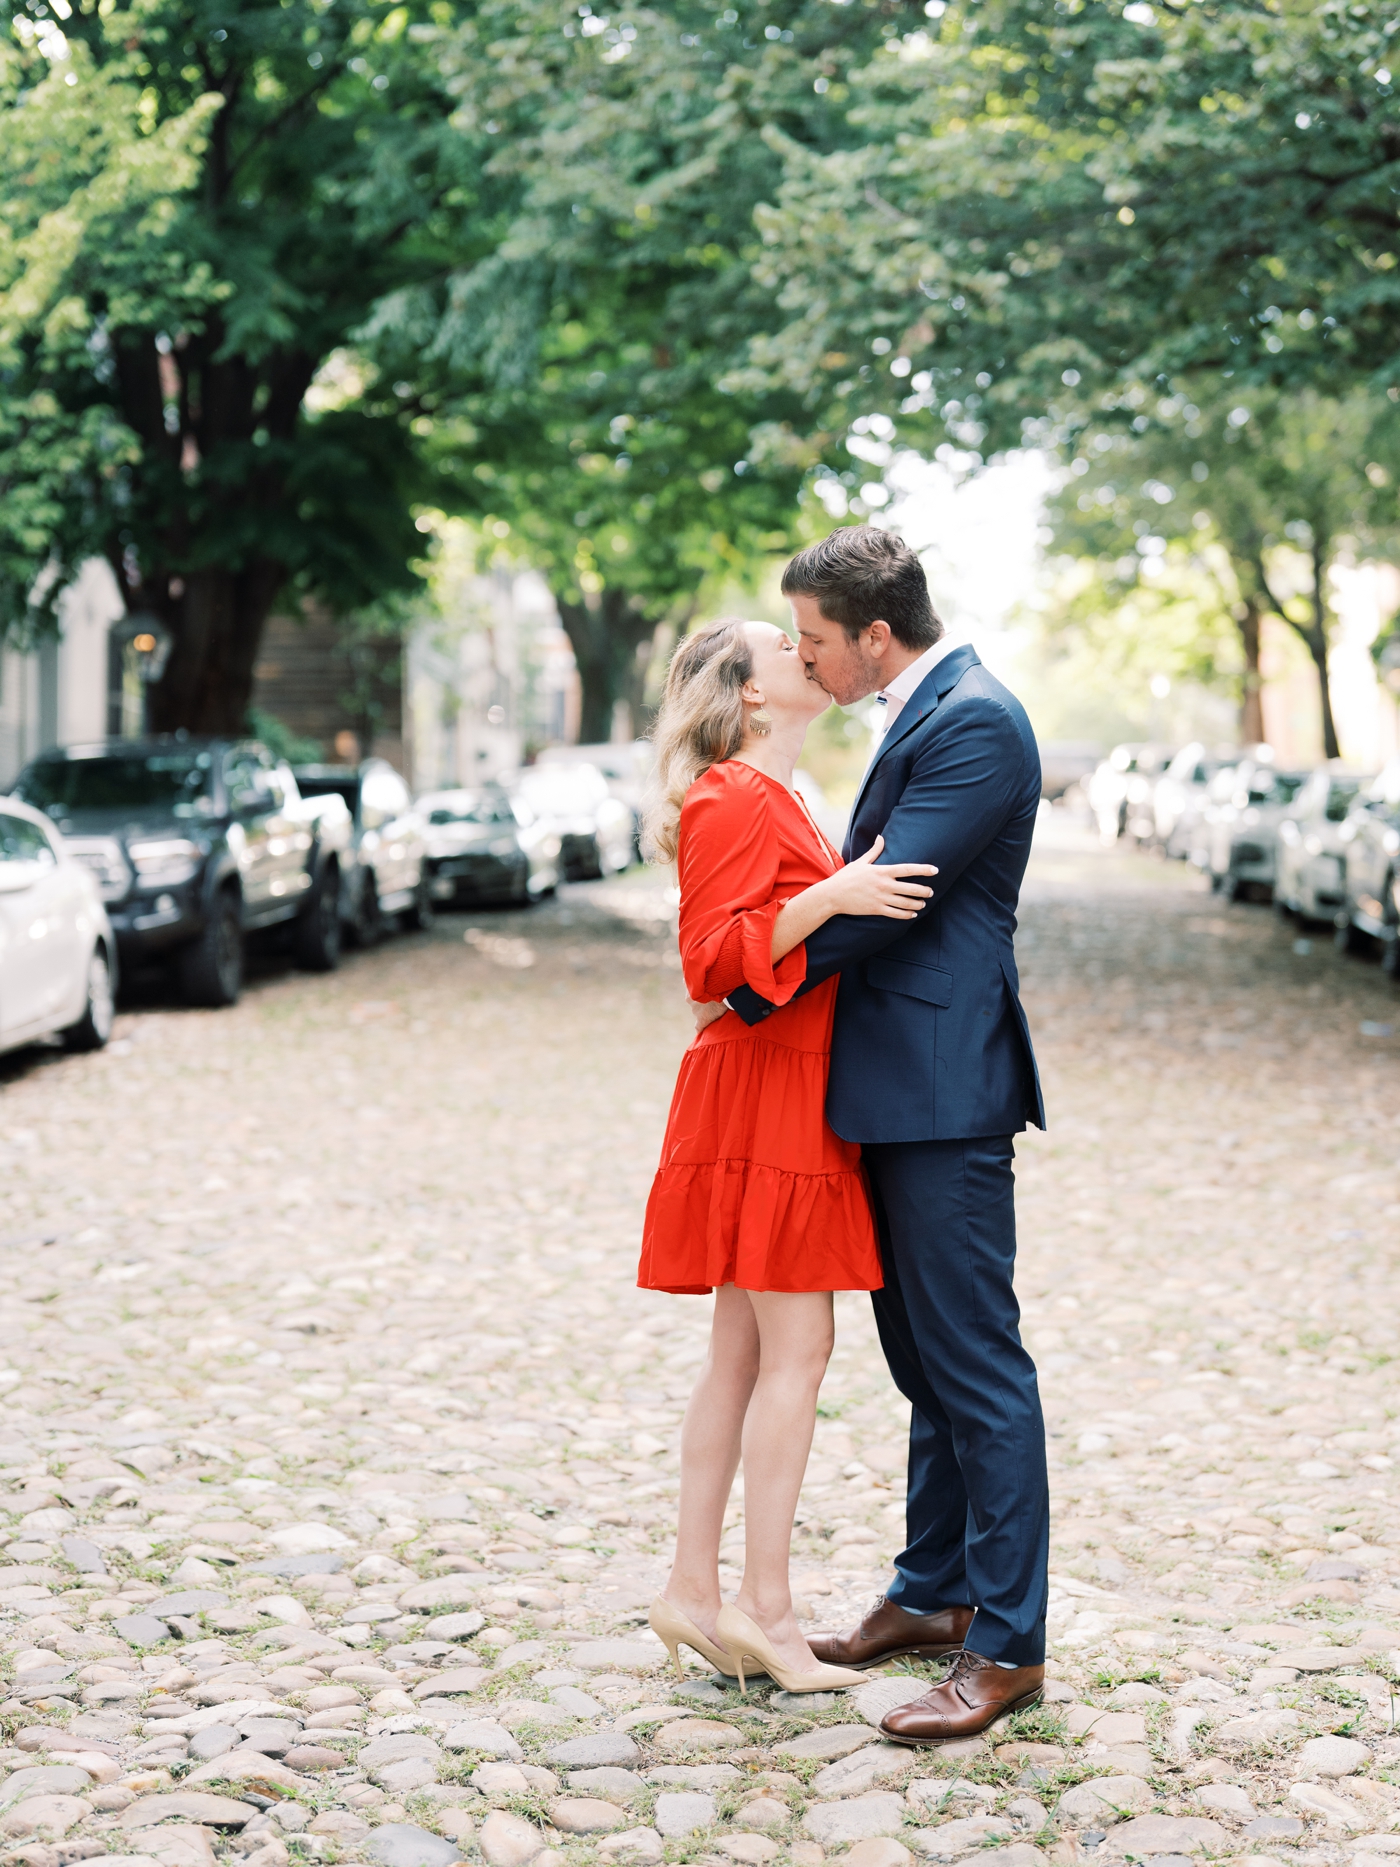 Couple in suit and dress on cobblestone street